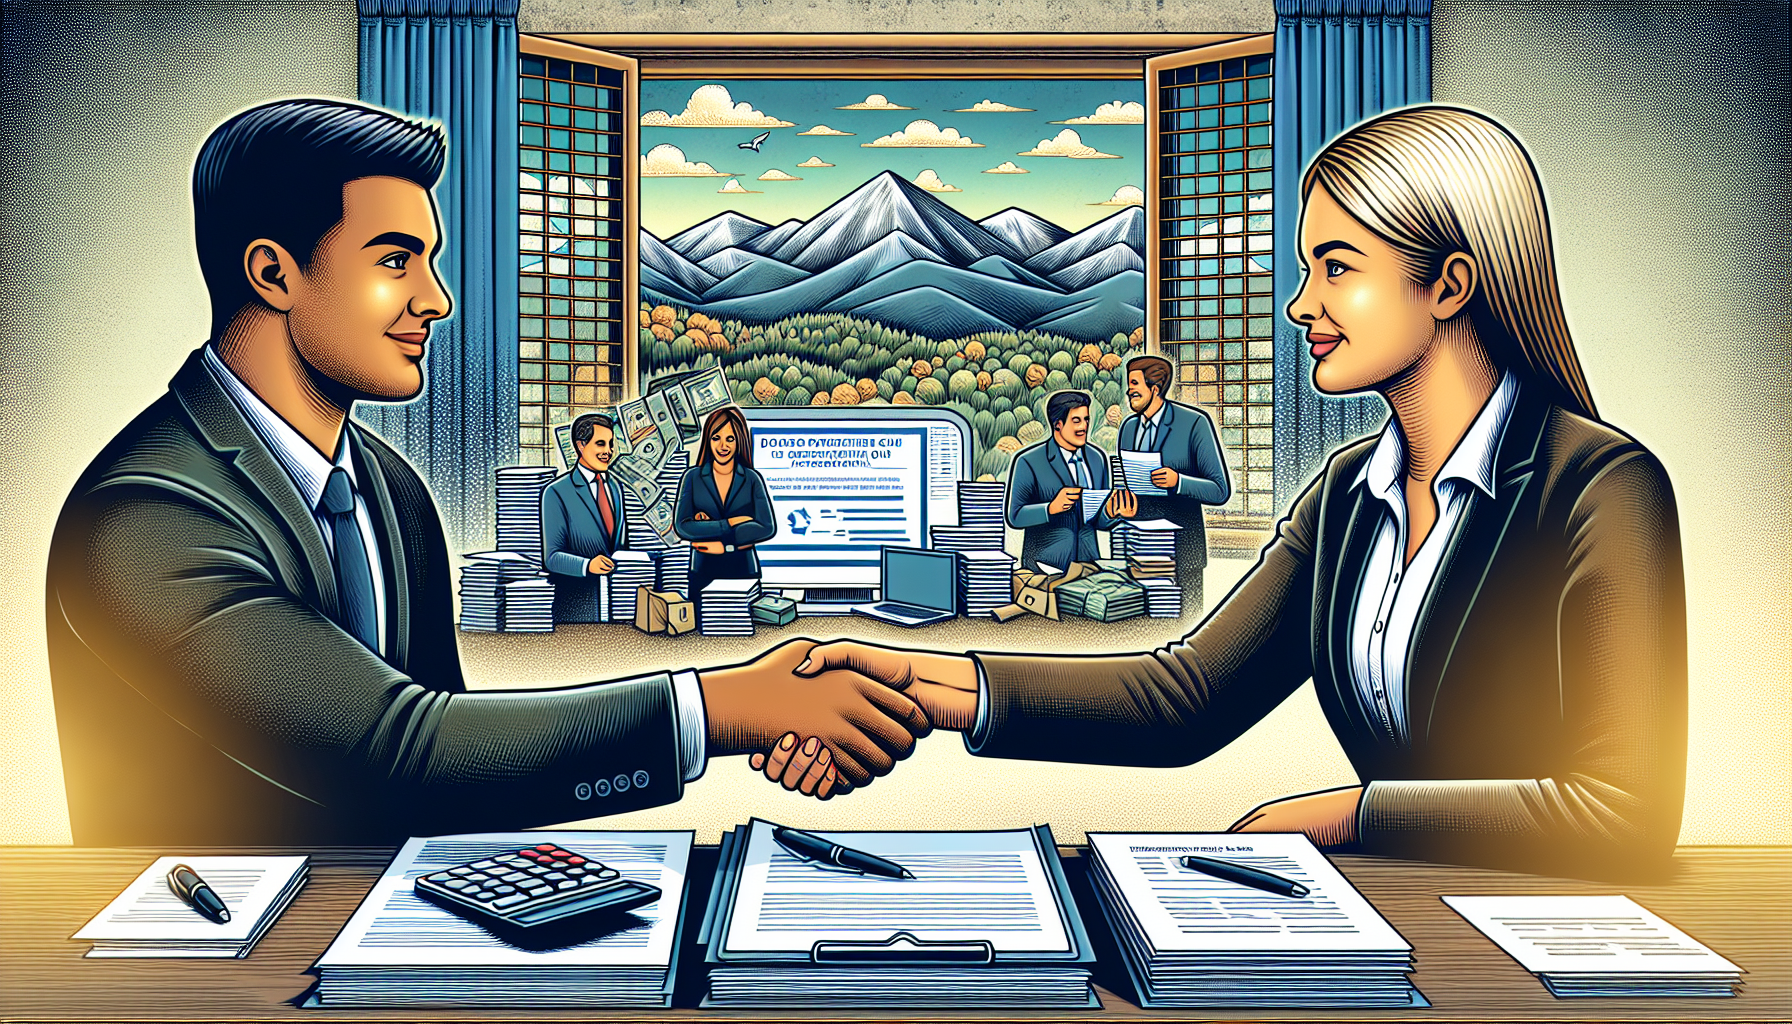 Illustration of a handshake between a borrower and a lender